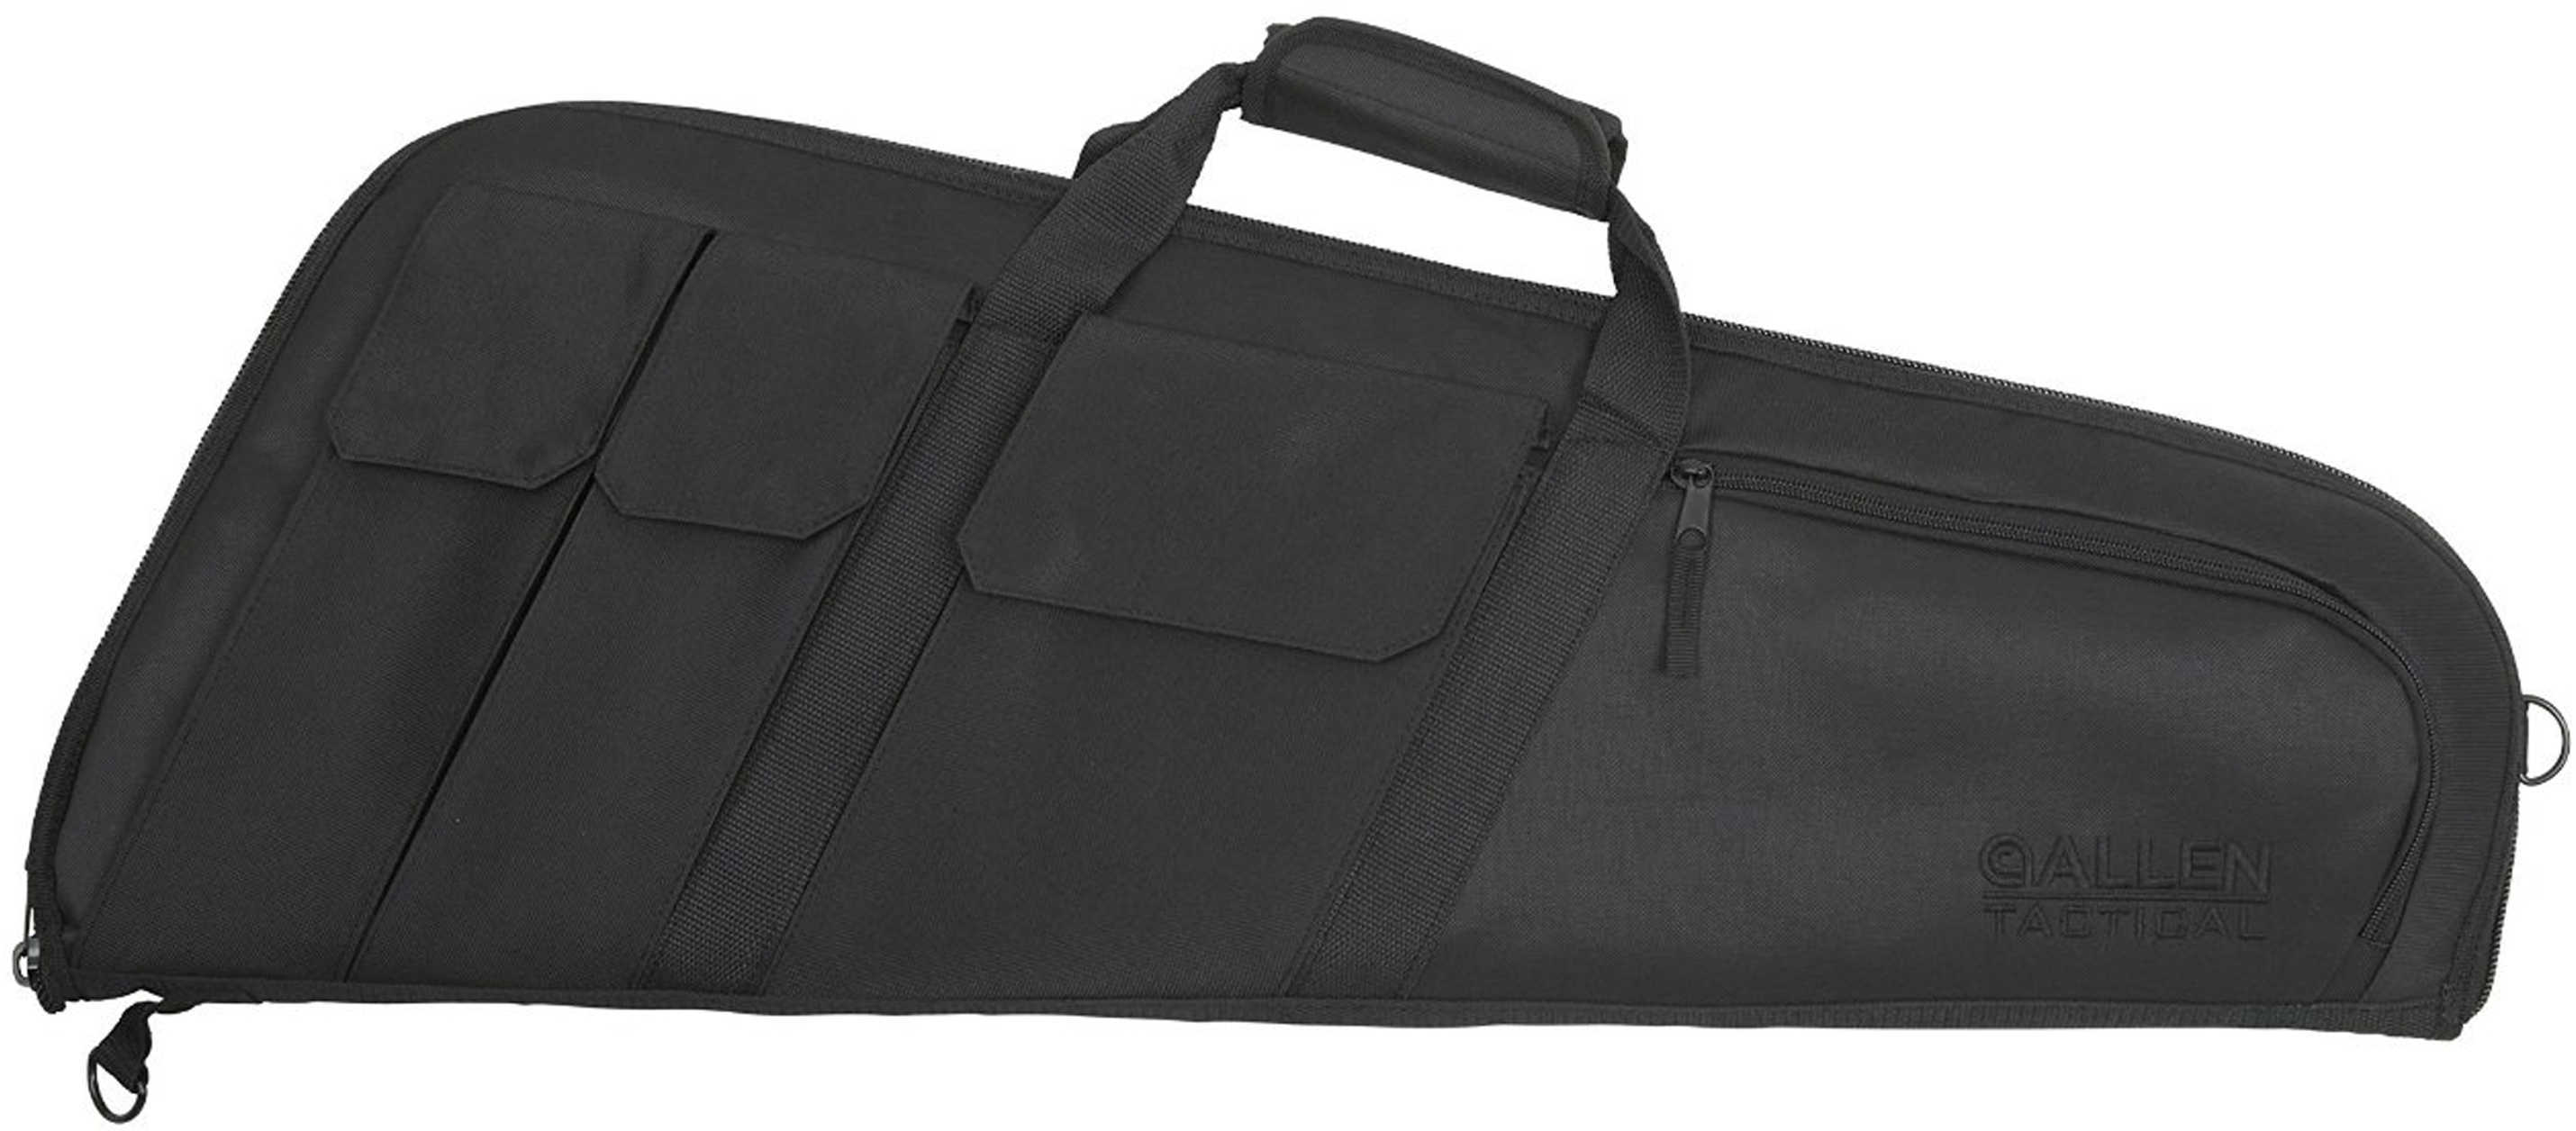 Allen Wedge Tactical Rifle Case Md: 10903-img-1